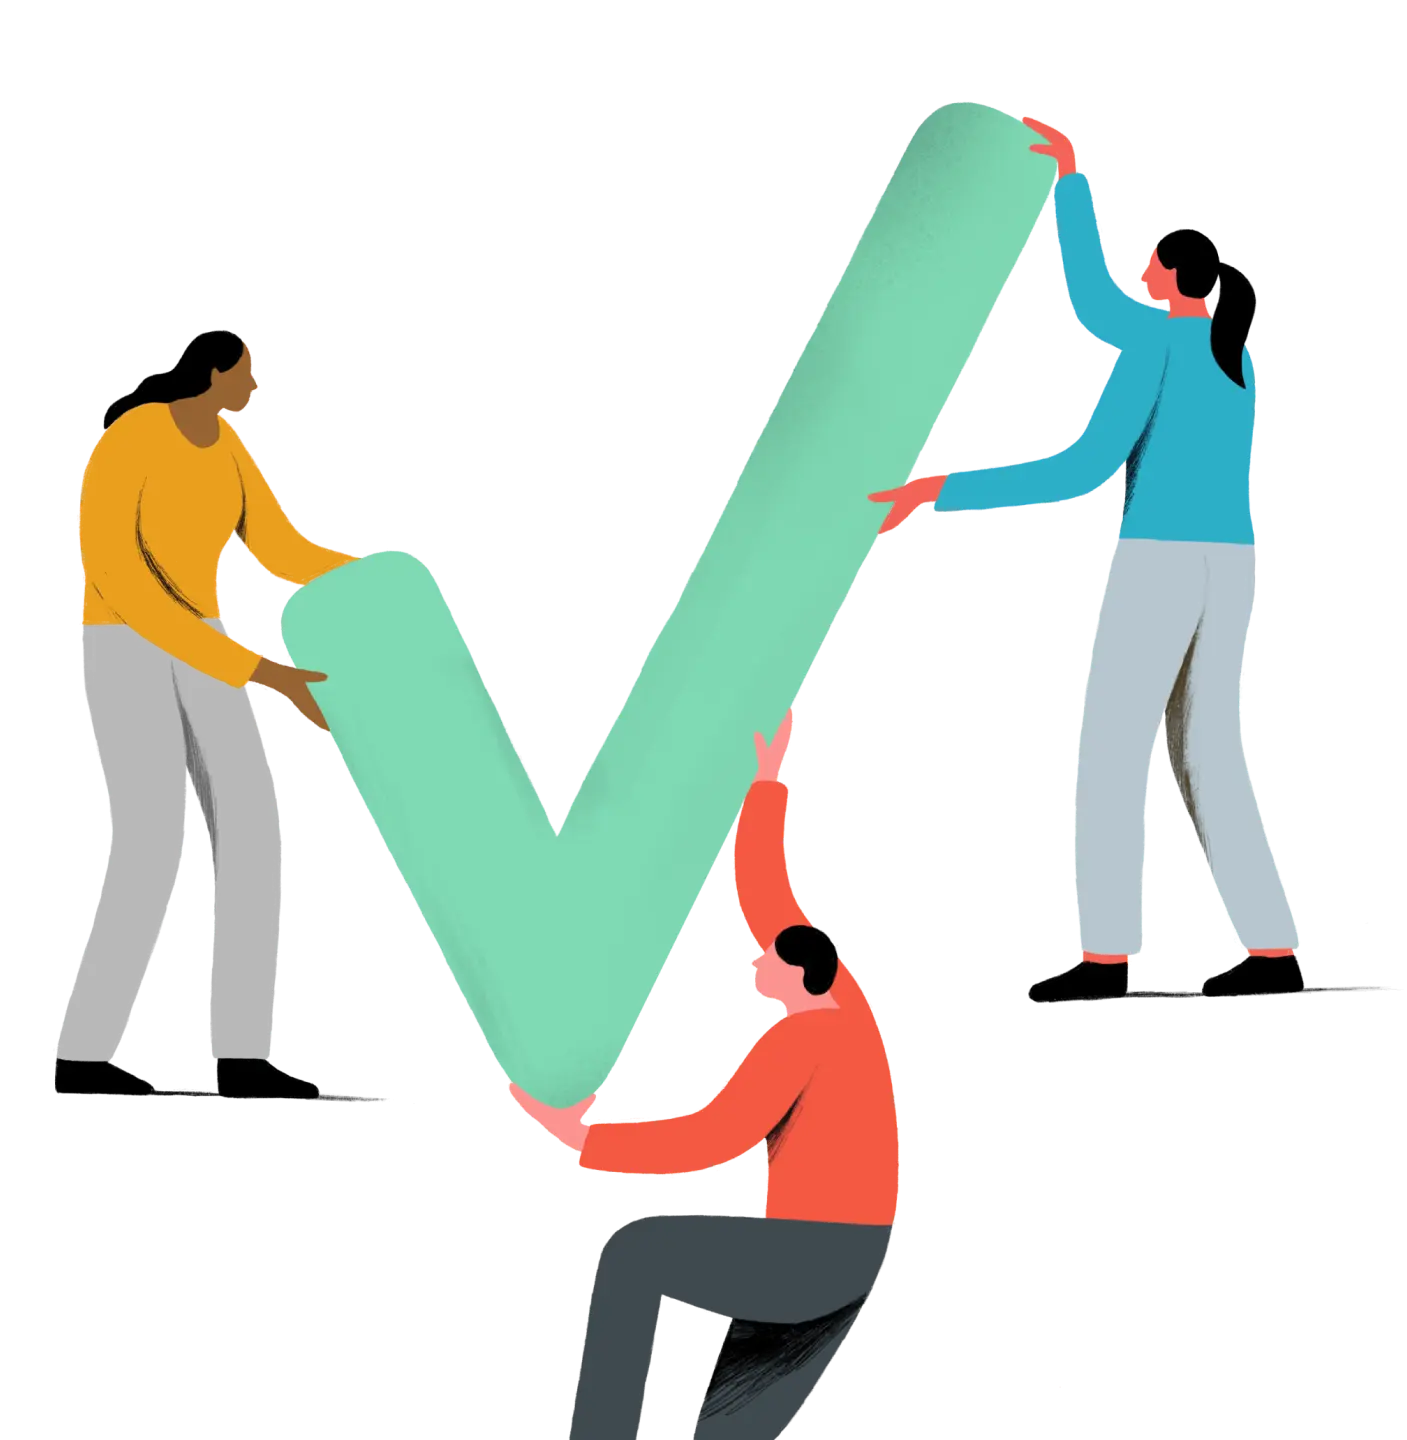 picture showing three people holding a checkbox to represent working together on a decision